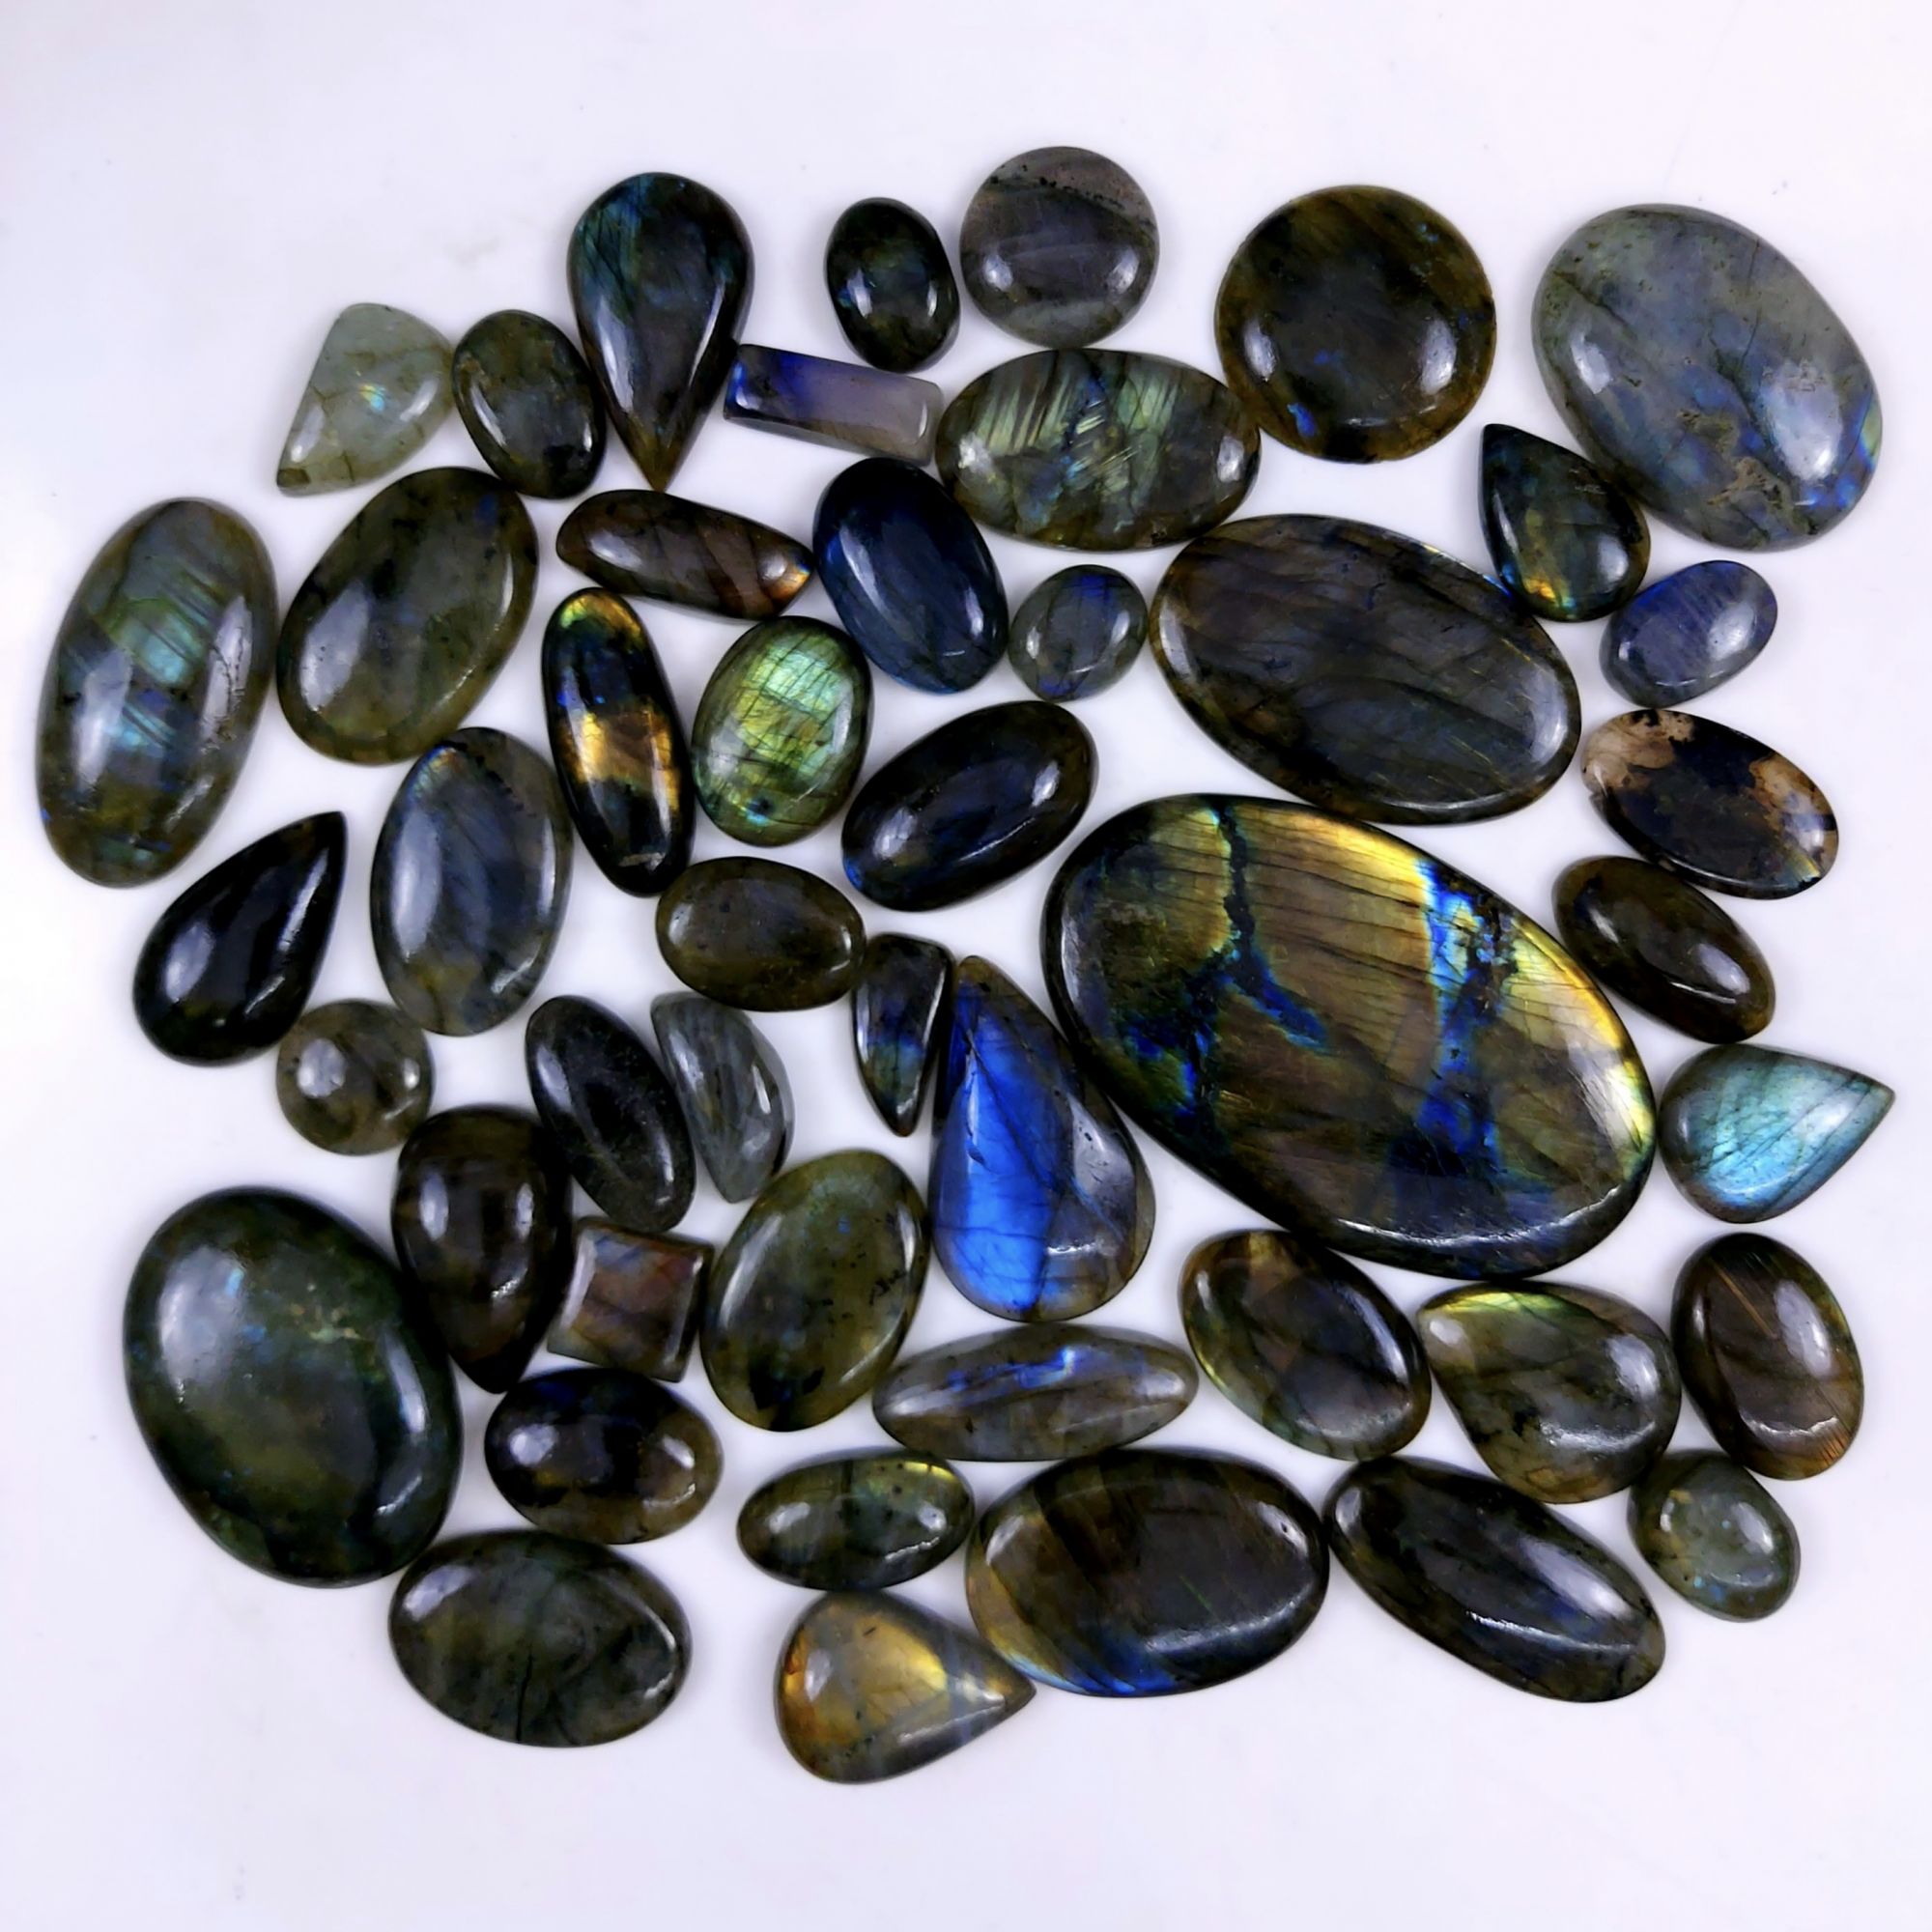 47pc 1718Cts Labradorite Cabochon Multifire Healing Crystal For Jewelry Supplies, Labradorite Necklace Handmade Wire Wrapped Gemstone Pendant 70x45 17x17mm#6377